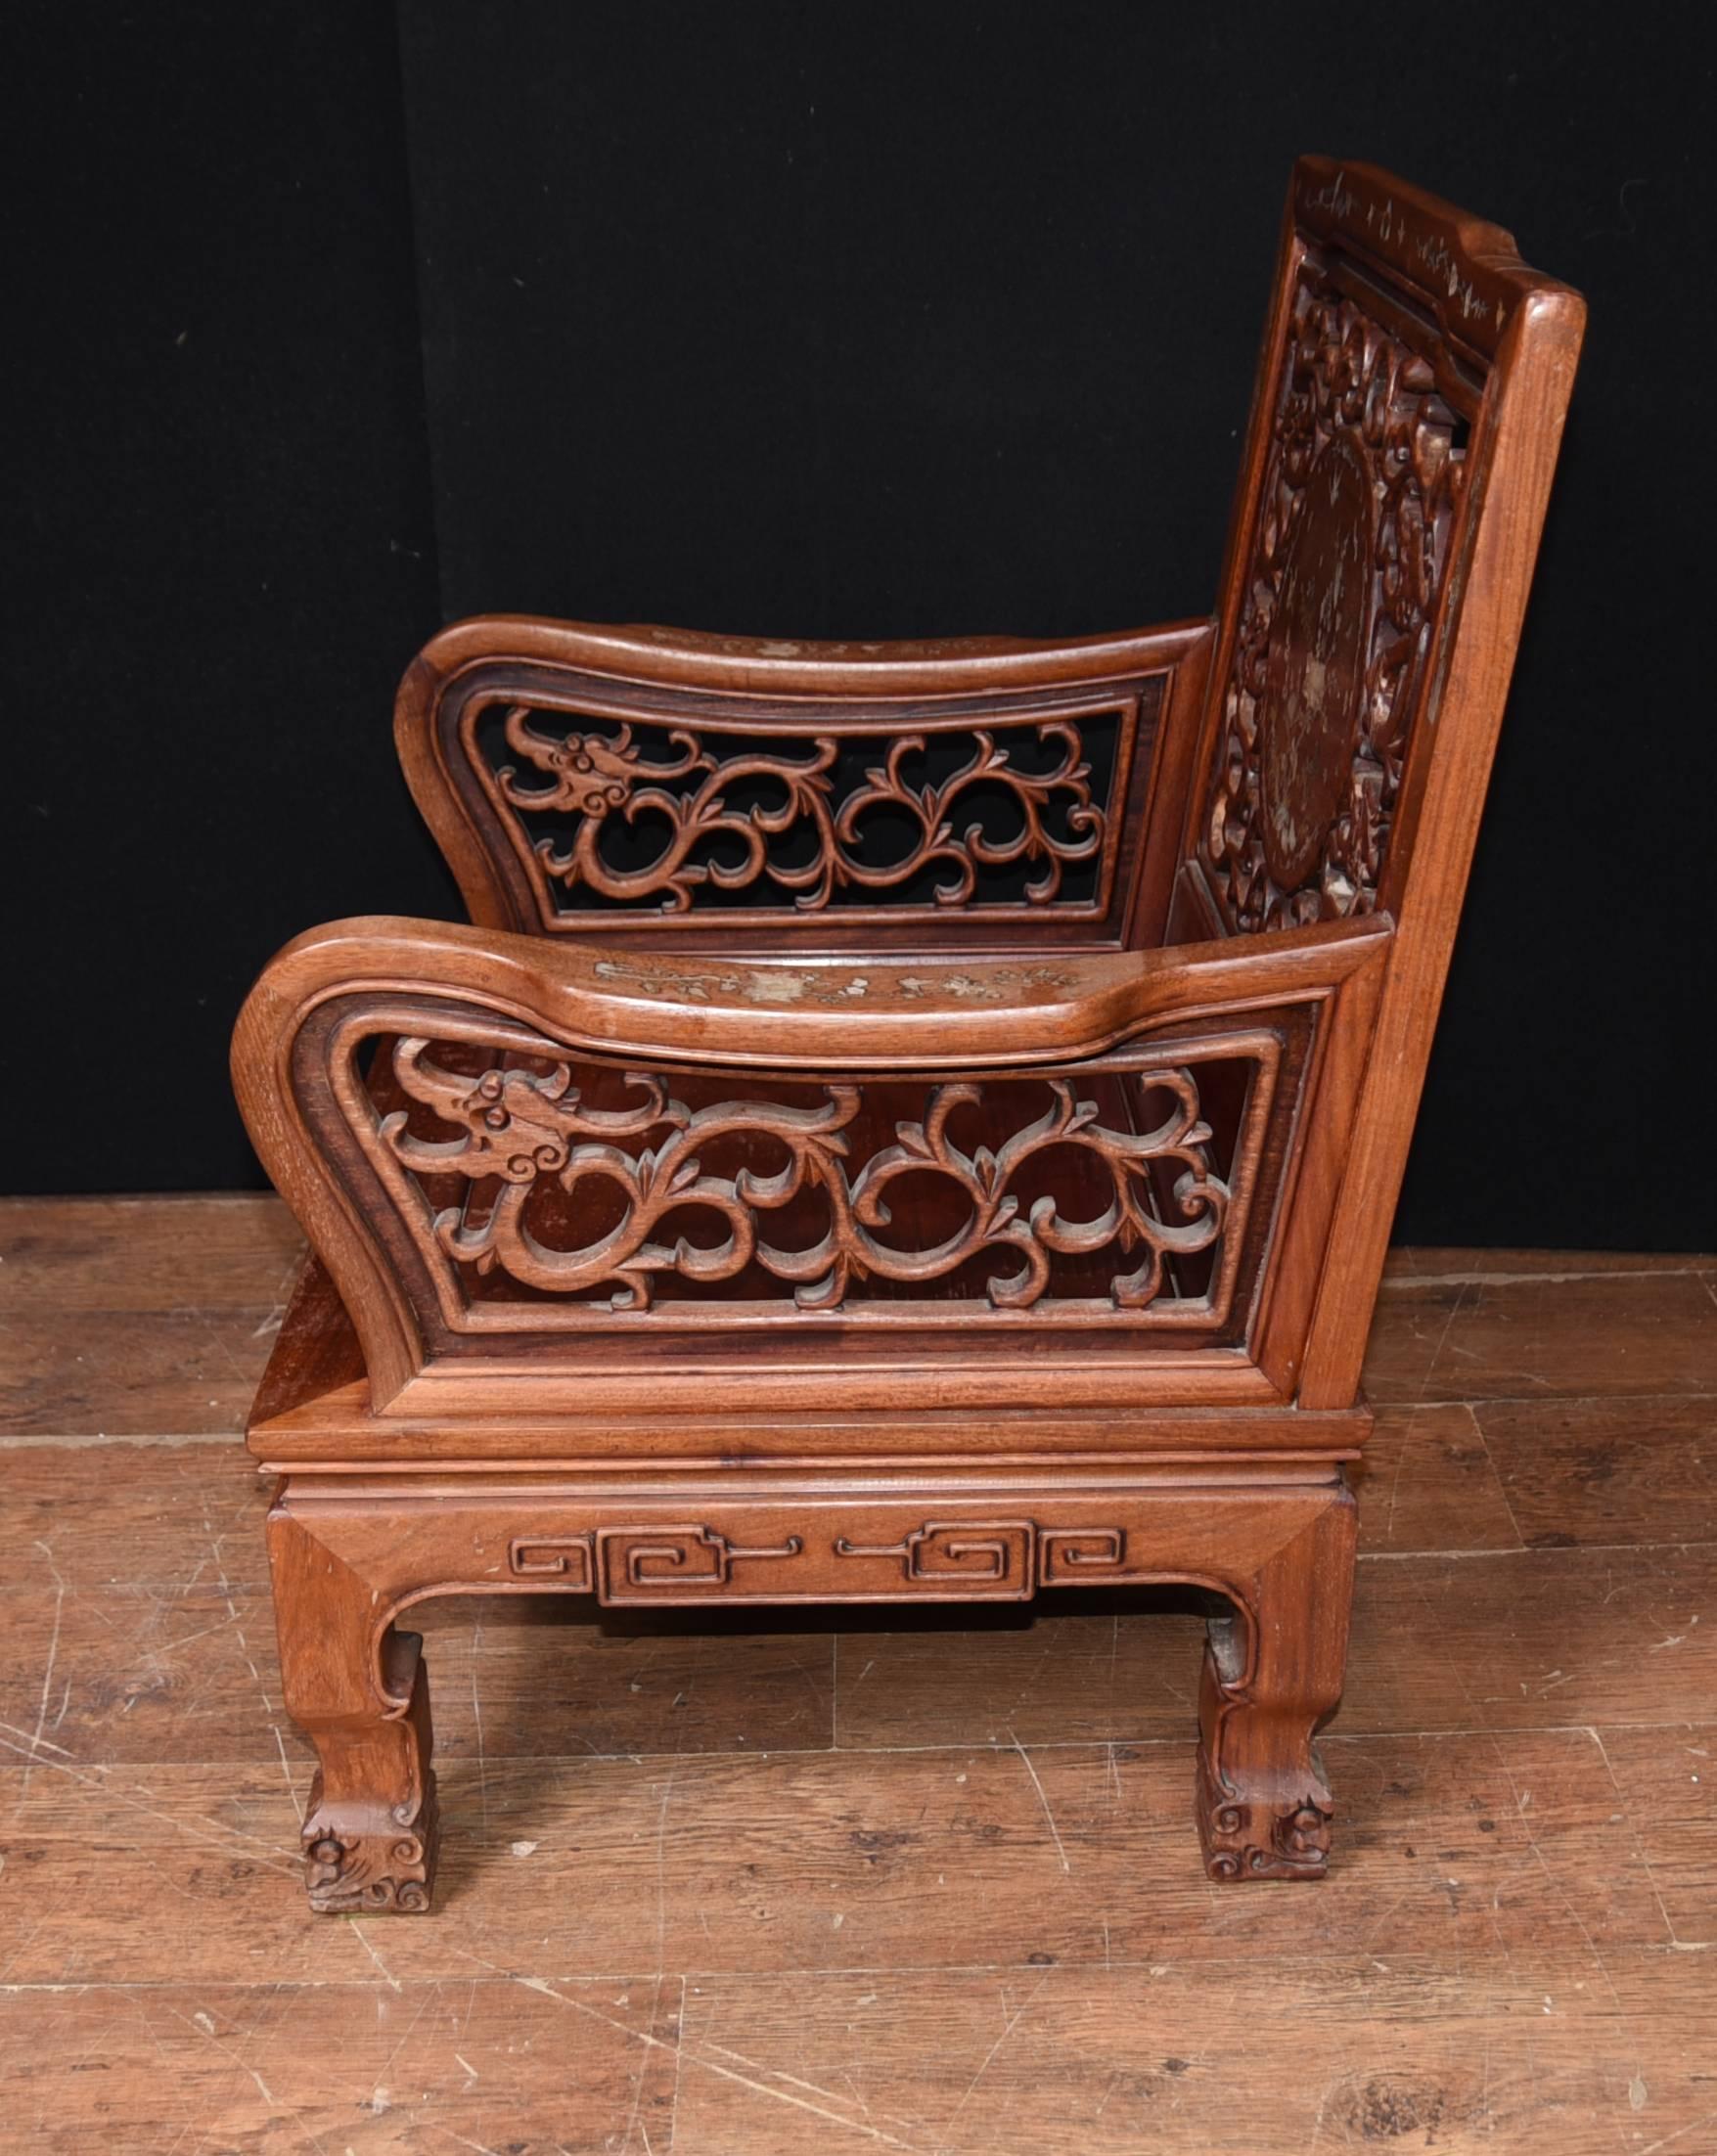 Mid-20th Century Pair of Antique Chinese Hardwood Armchairs Mother-of-Pearl Inlay Chair For Sale